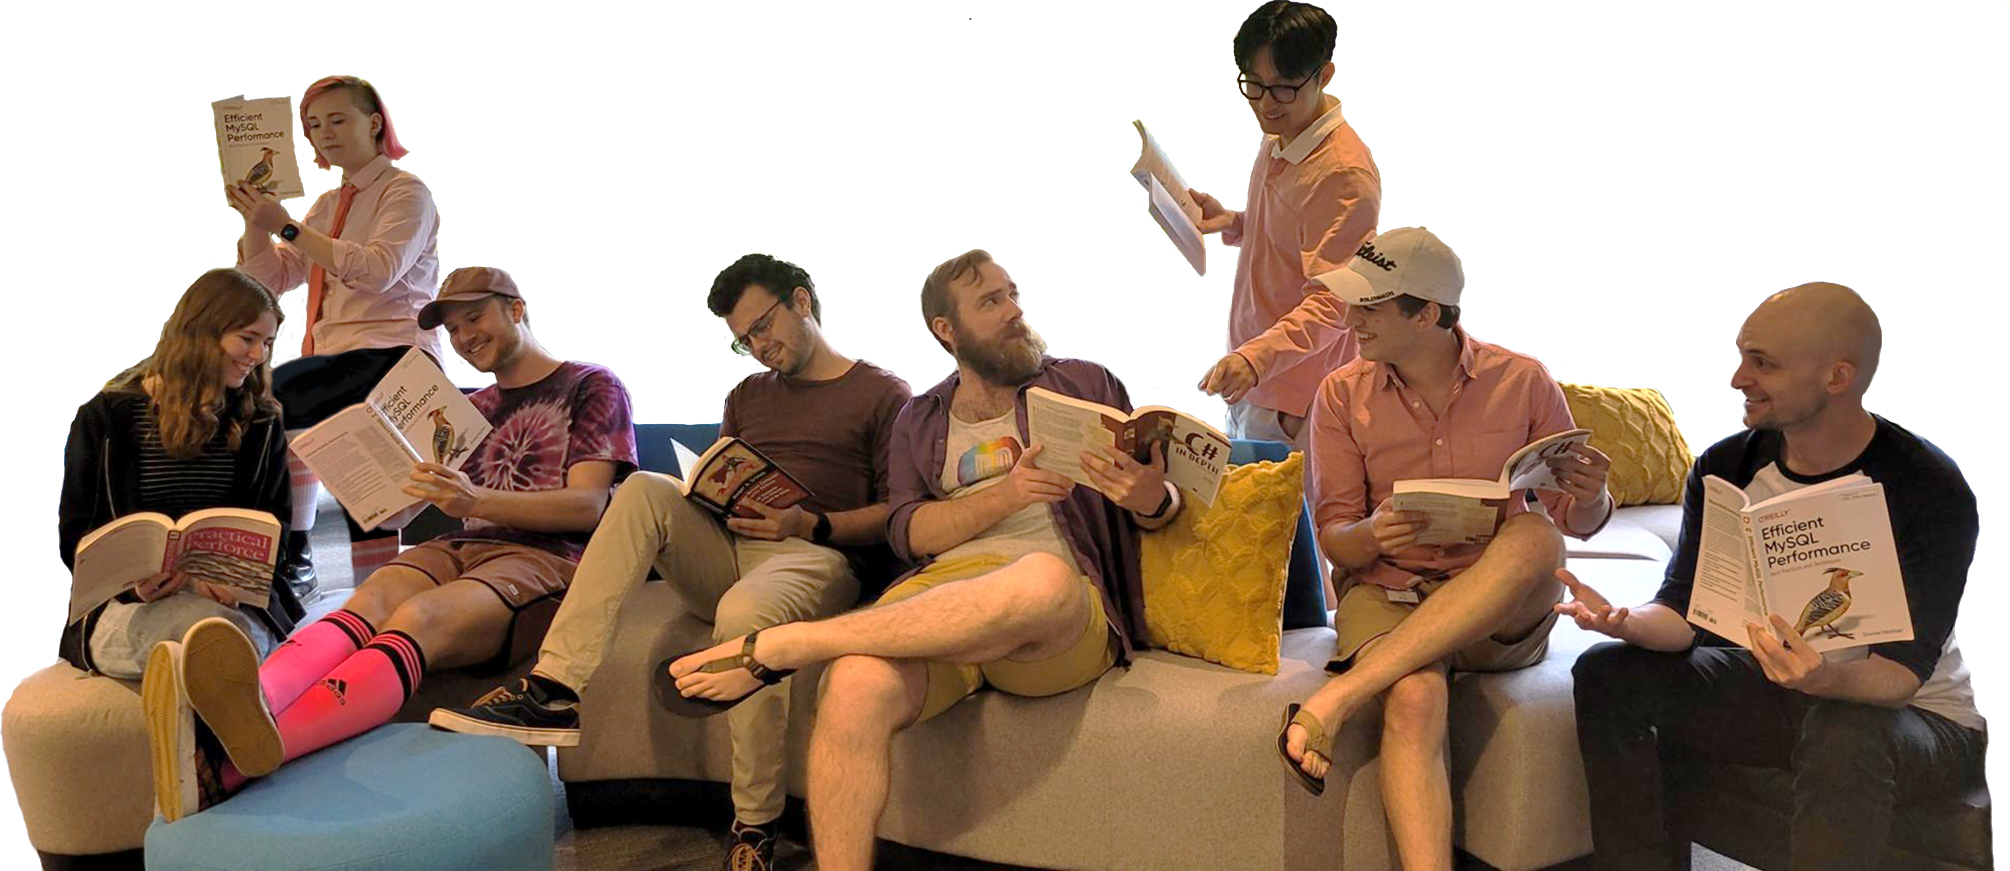 Group of people reading coding books